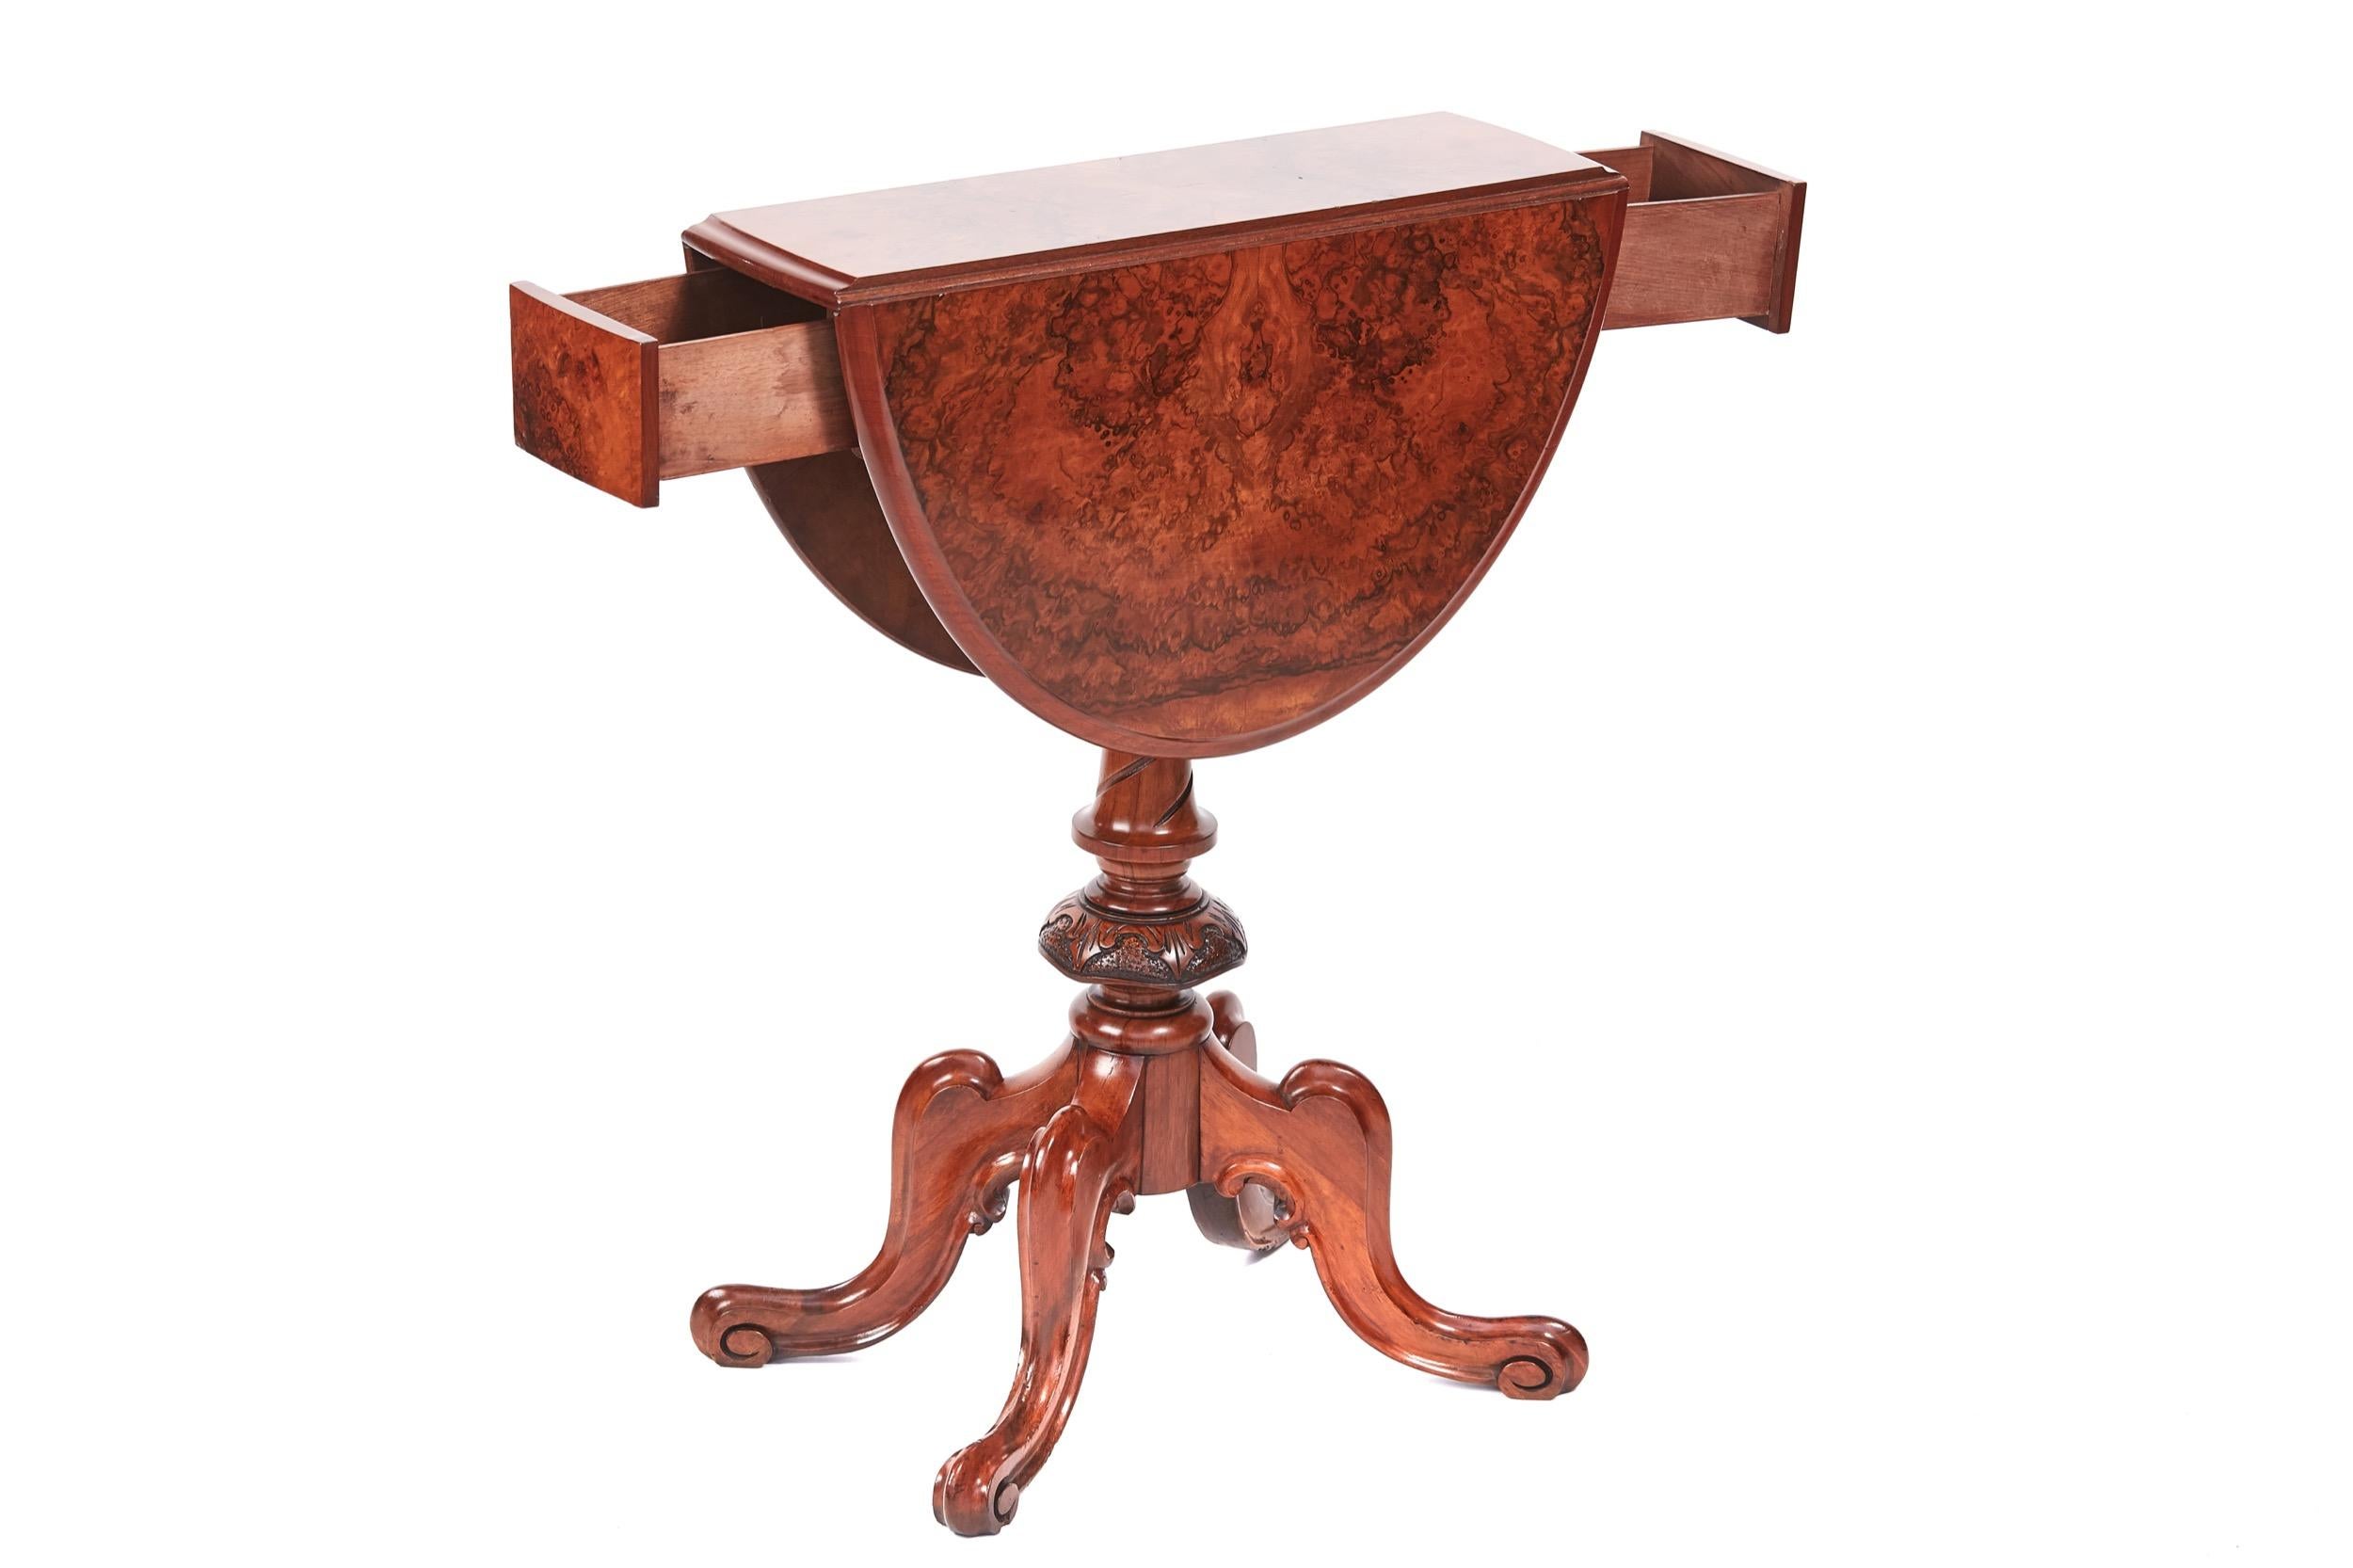 Fine Quality Victorian Burr Walnut Drop Leaf Lamp Table In Excellent Condition For Sale In Stutton, GB